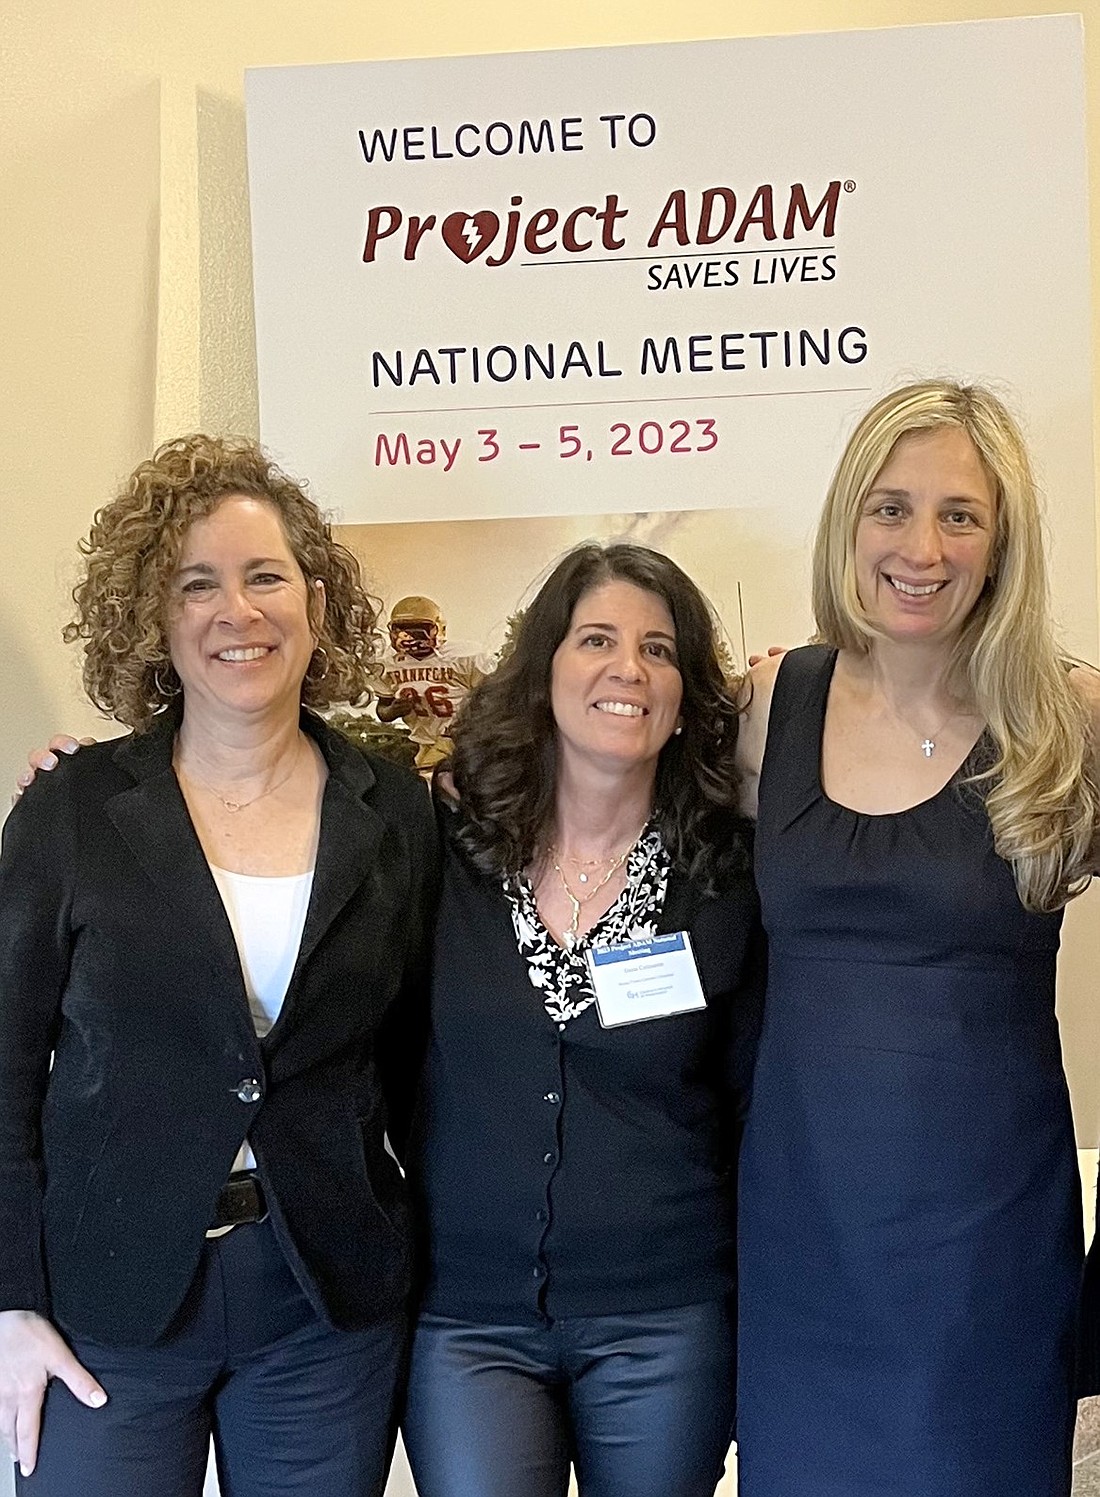 Alice Schoen (left), Dana Colasante and Dr. Christa Miliaresis, a pediatric cardiologist, pose for a photo at the national Project ADAM convention in Philadelphia in May 2023. The Rye Brook women and the Maria Fareri Children’s Hospital are founders and facilitators of first Project ADAM branch in New York, a program that works to ensure school districts are prepared to handle sudden cardiac arrest emergencies.